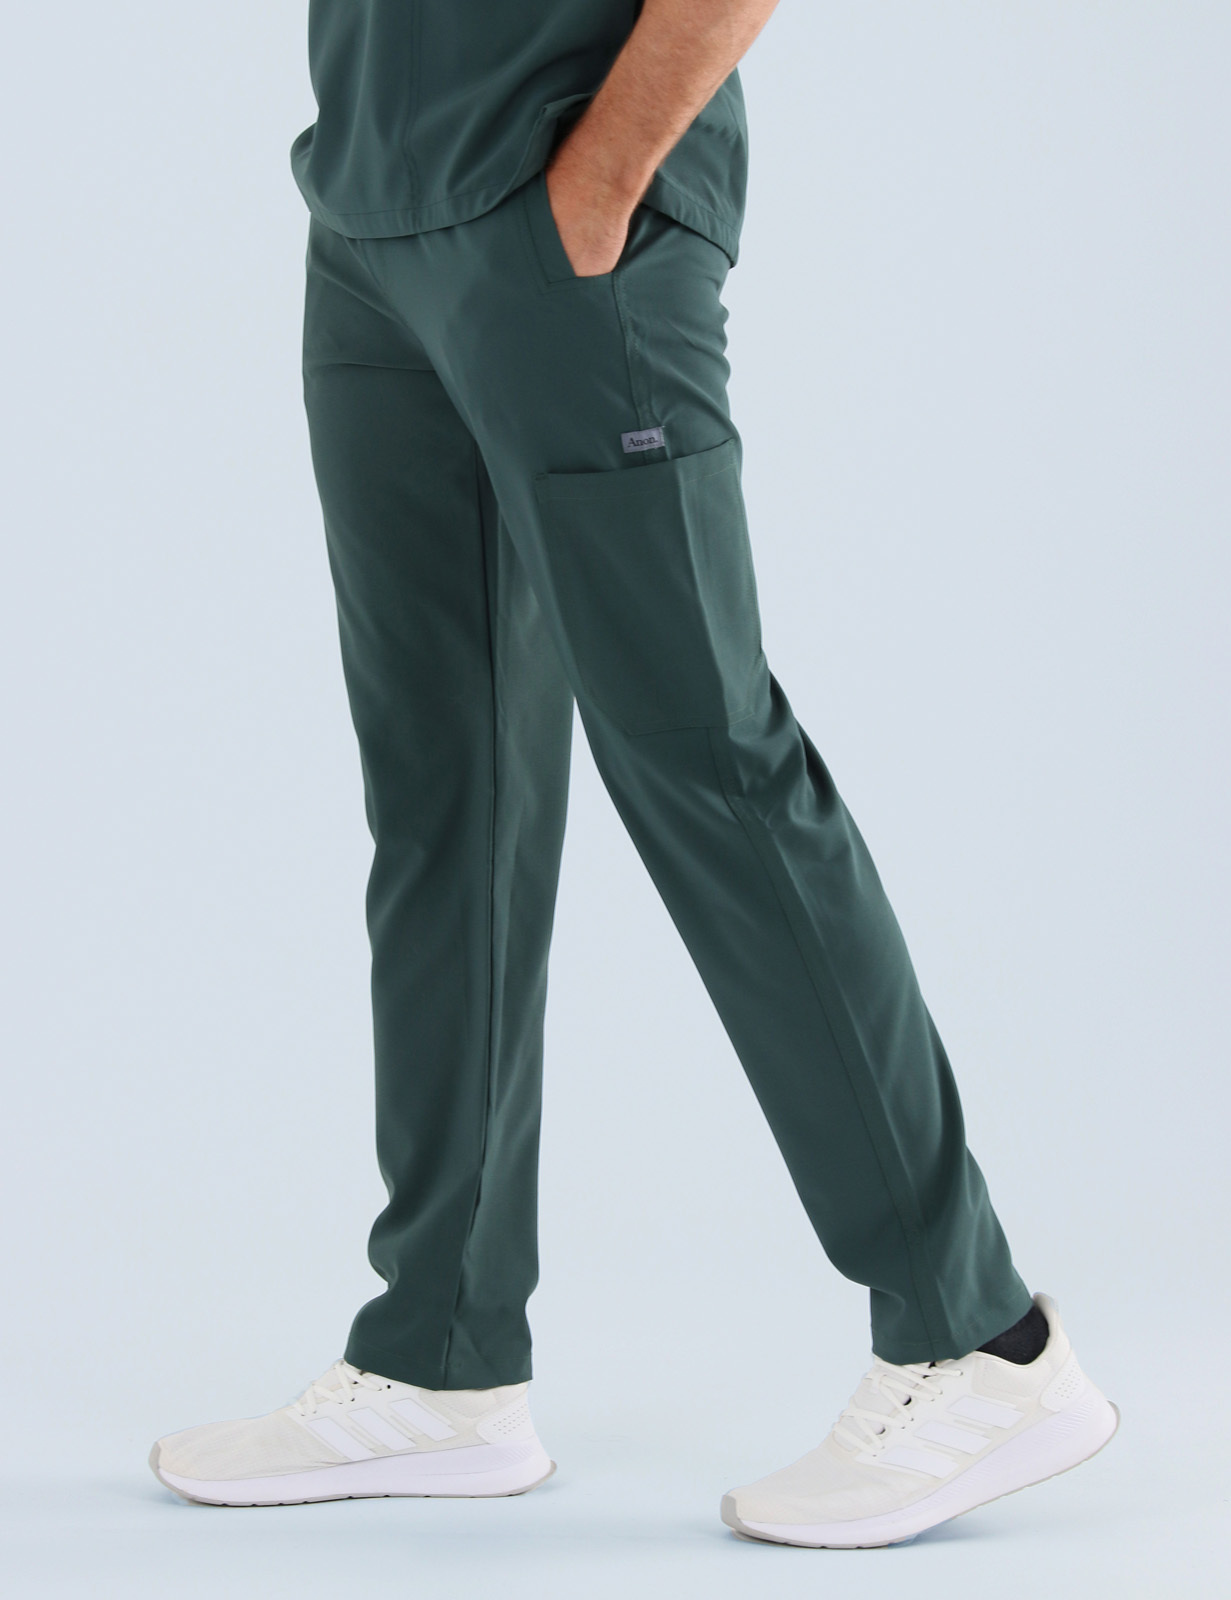 Anon Men's Scrub Pants (Stealth Collection) Poly/Spandex - Forest Green